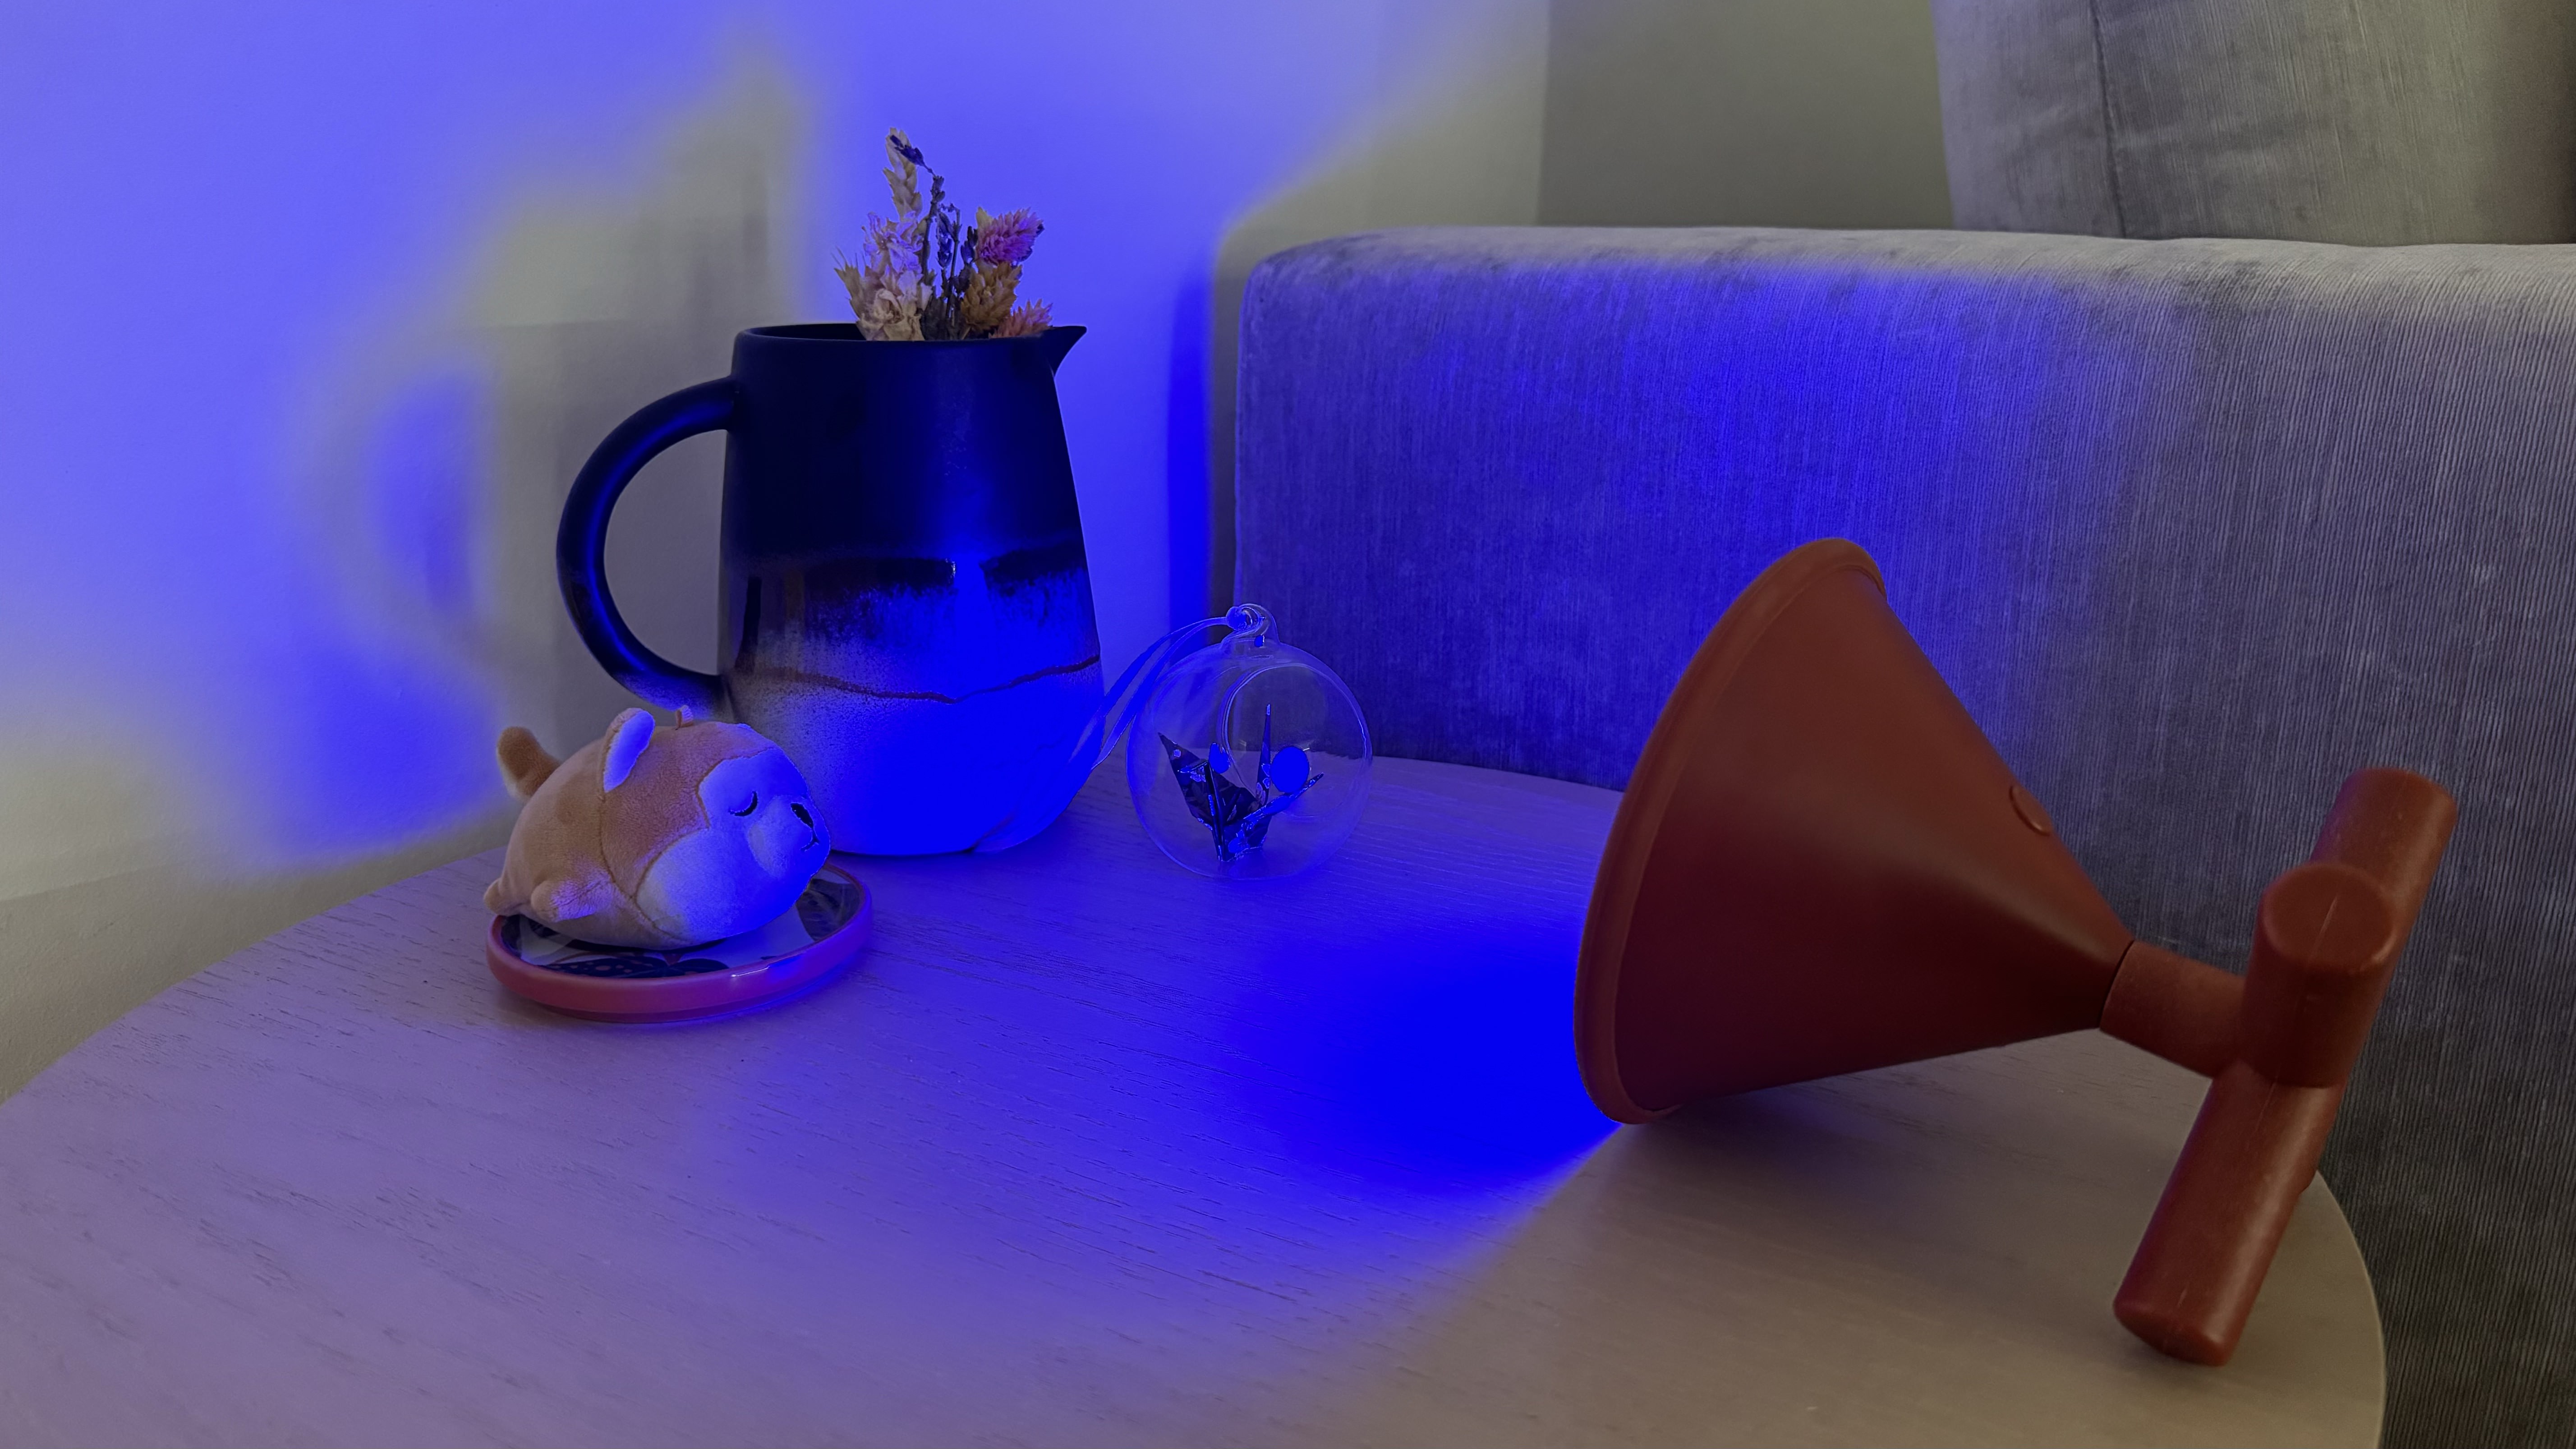 I didn’t get it at first, but Nanoleaf’s Umbra Cono Portable Smart Lamp has won me over with its design-first approach